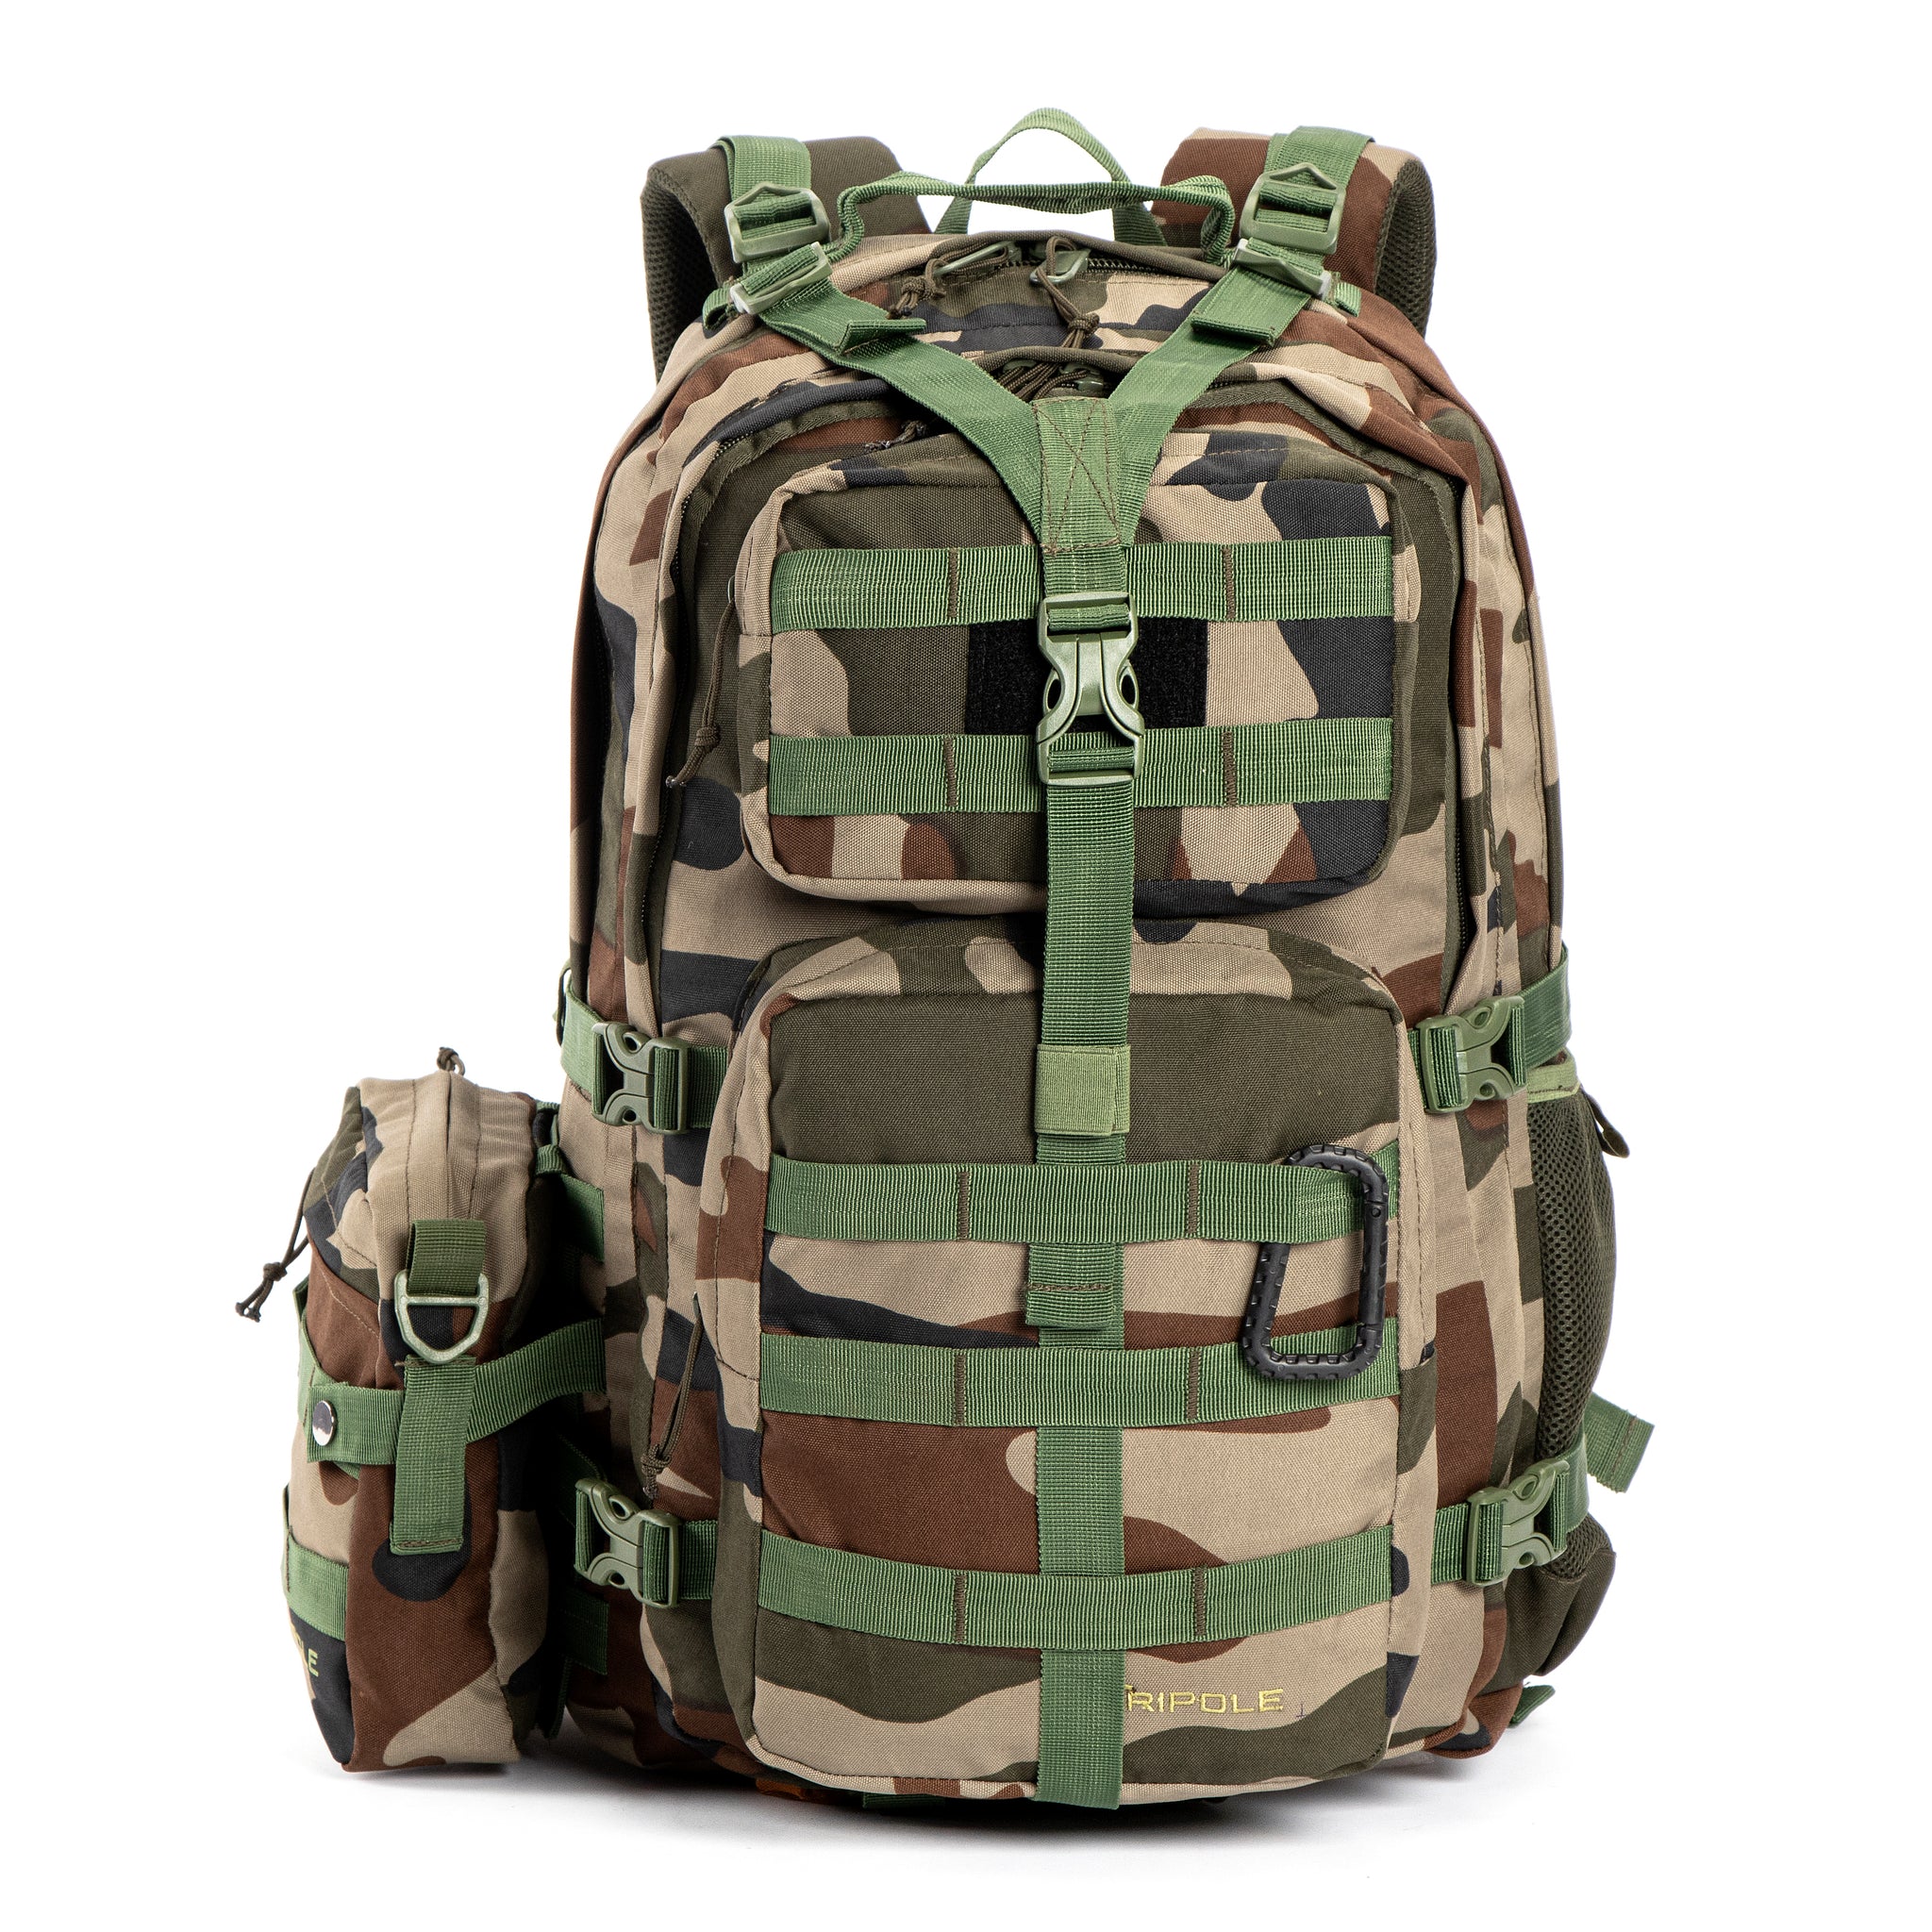 Wildlife Bag Army Military Camo Print 20L - Green (15 inch Laptop  Compatible)